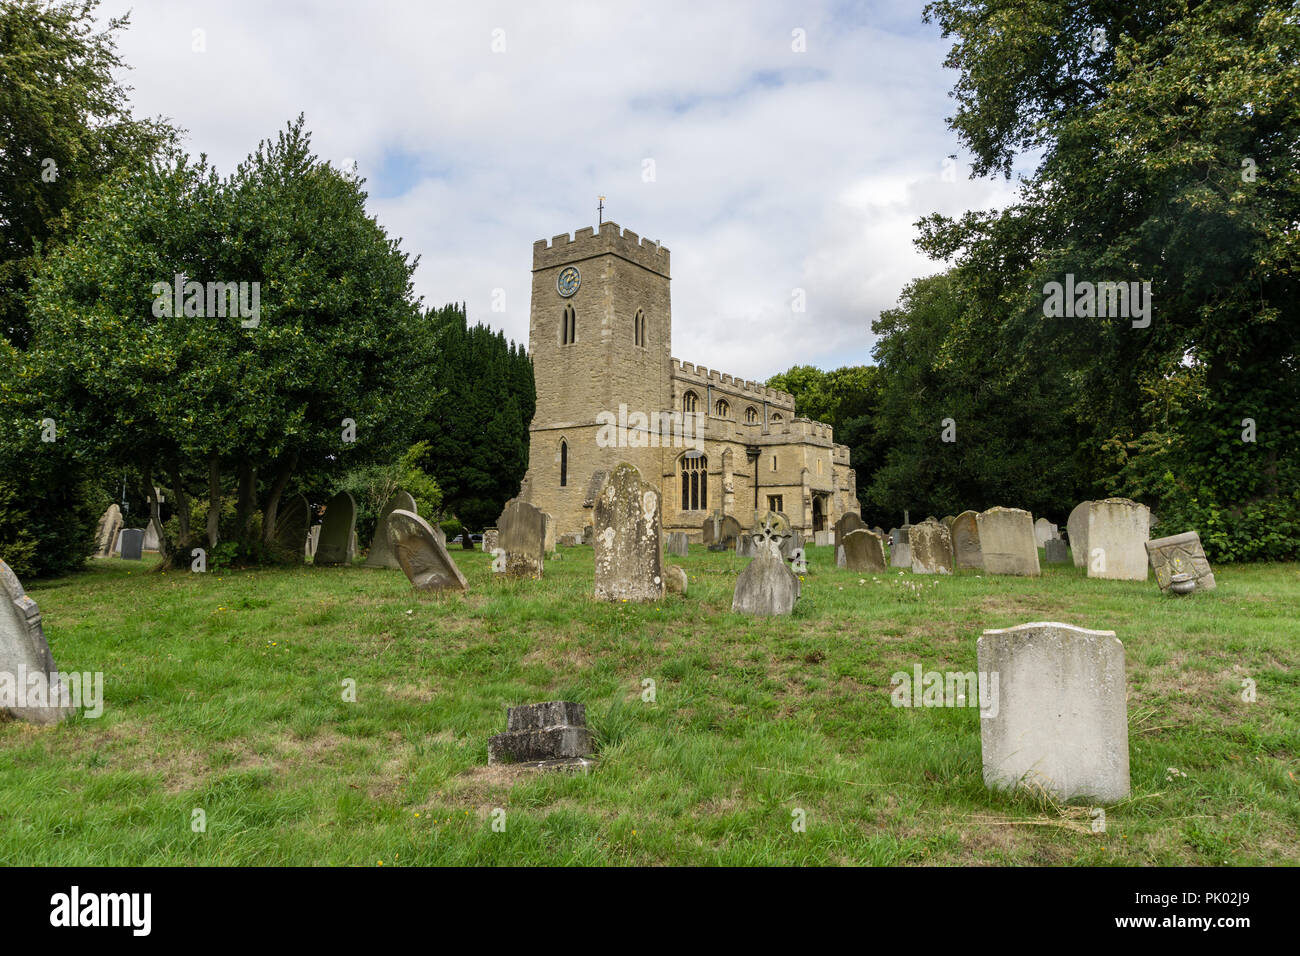 The parish church of All Saints in the Bedfordshire village of Milton Ernest, UK Stock Photo